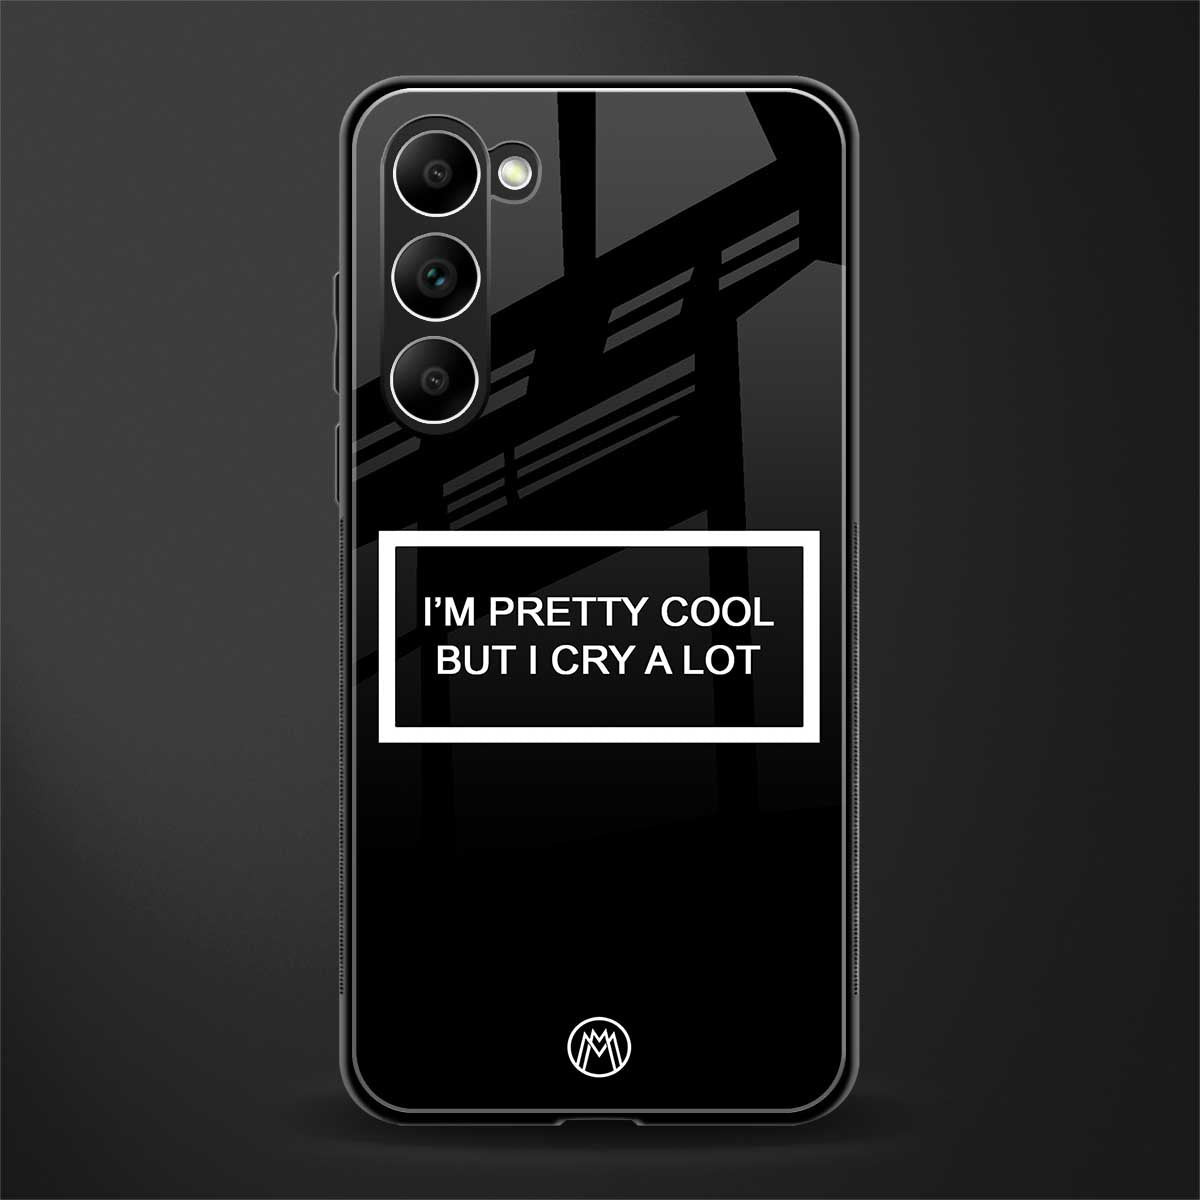 i'm pretty cool black edition glass case for phone case | glass case for samsung galaxy s23 plus